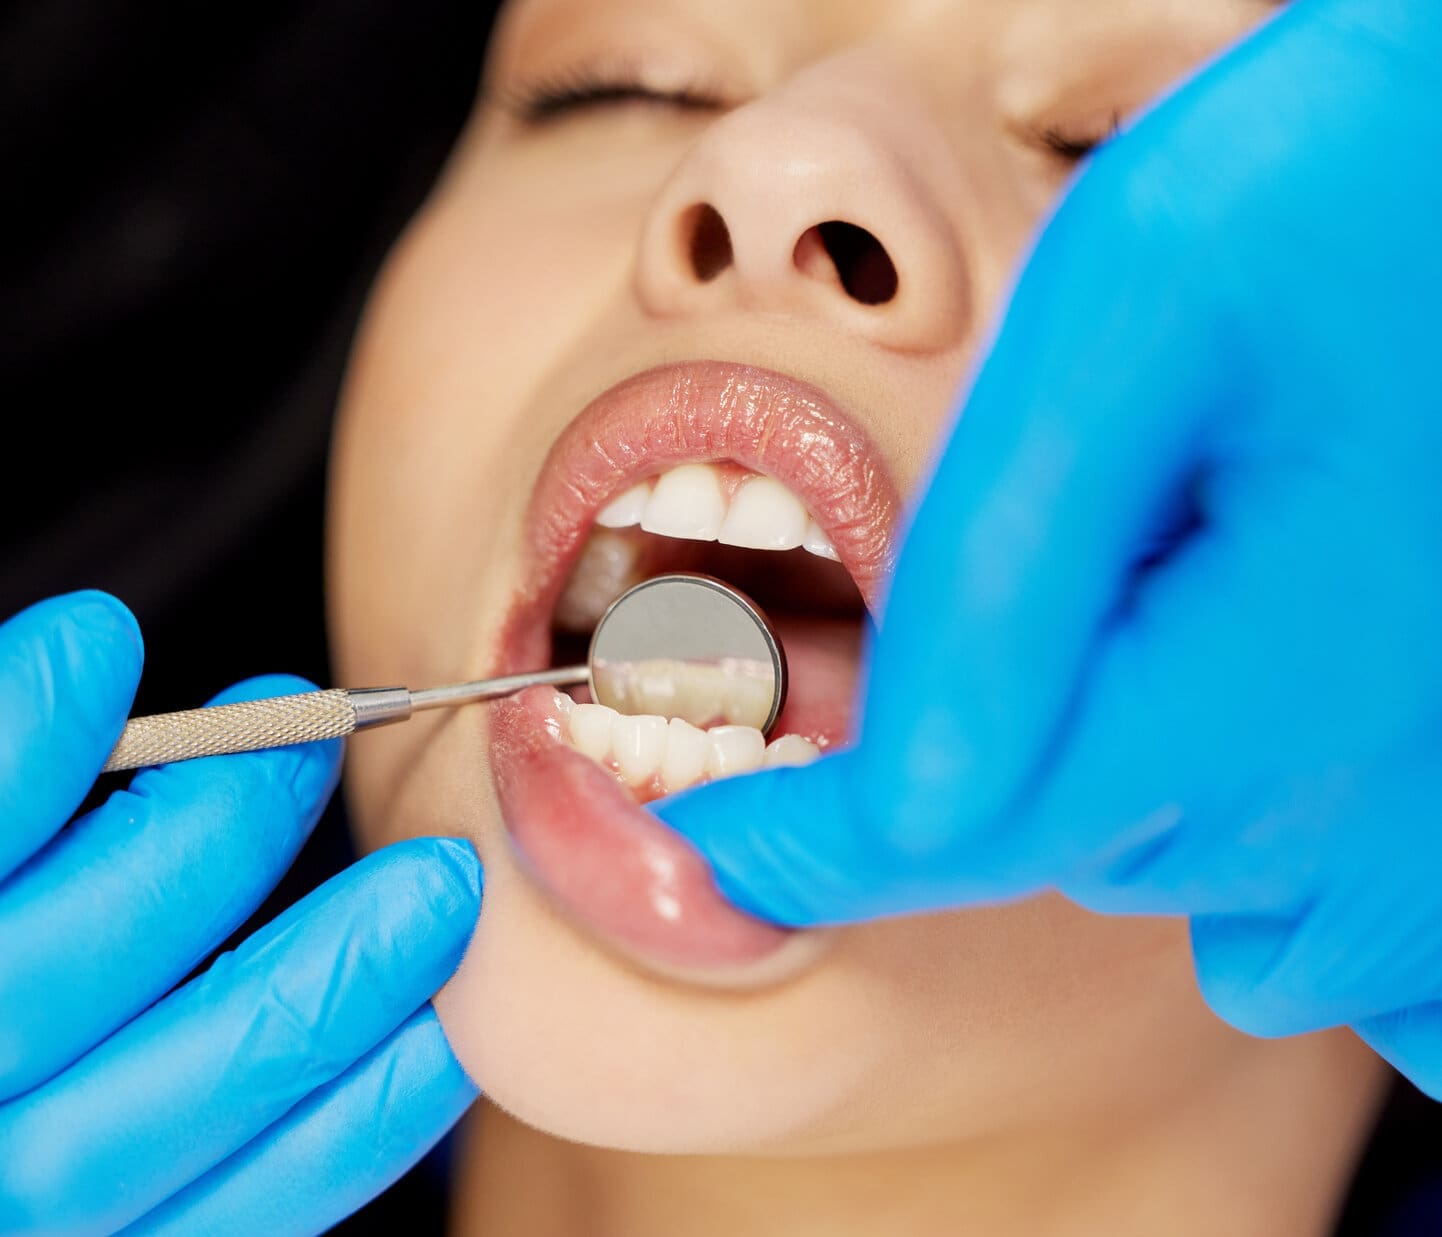 Shot of a young woman having a dental procedure performed on her.